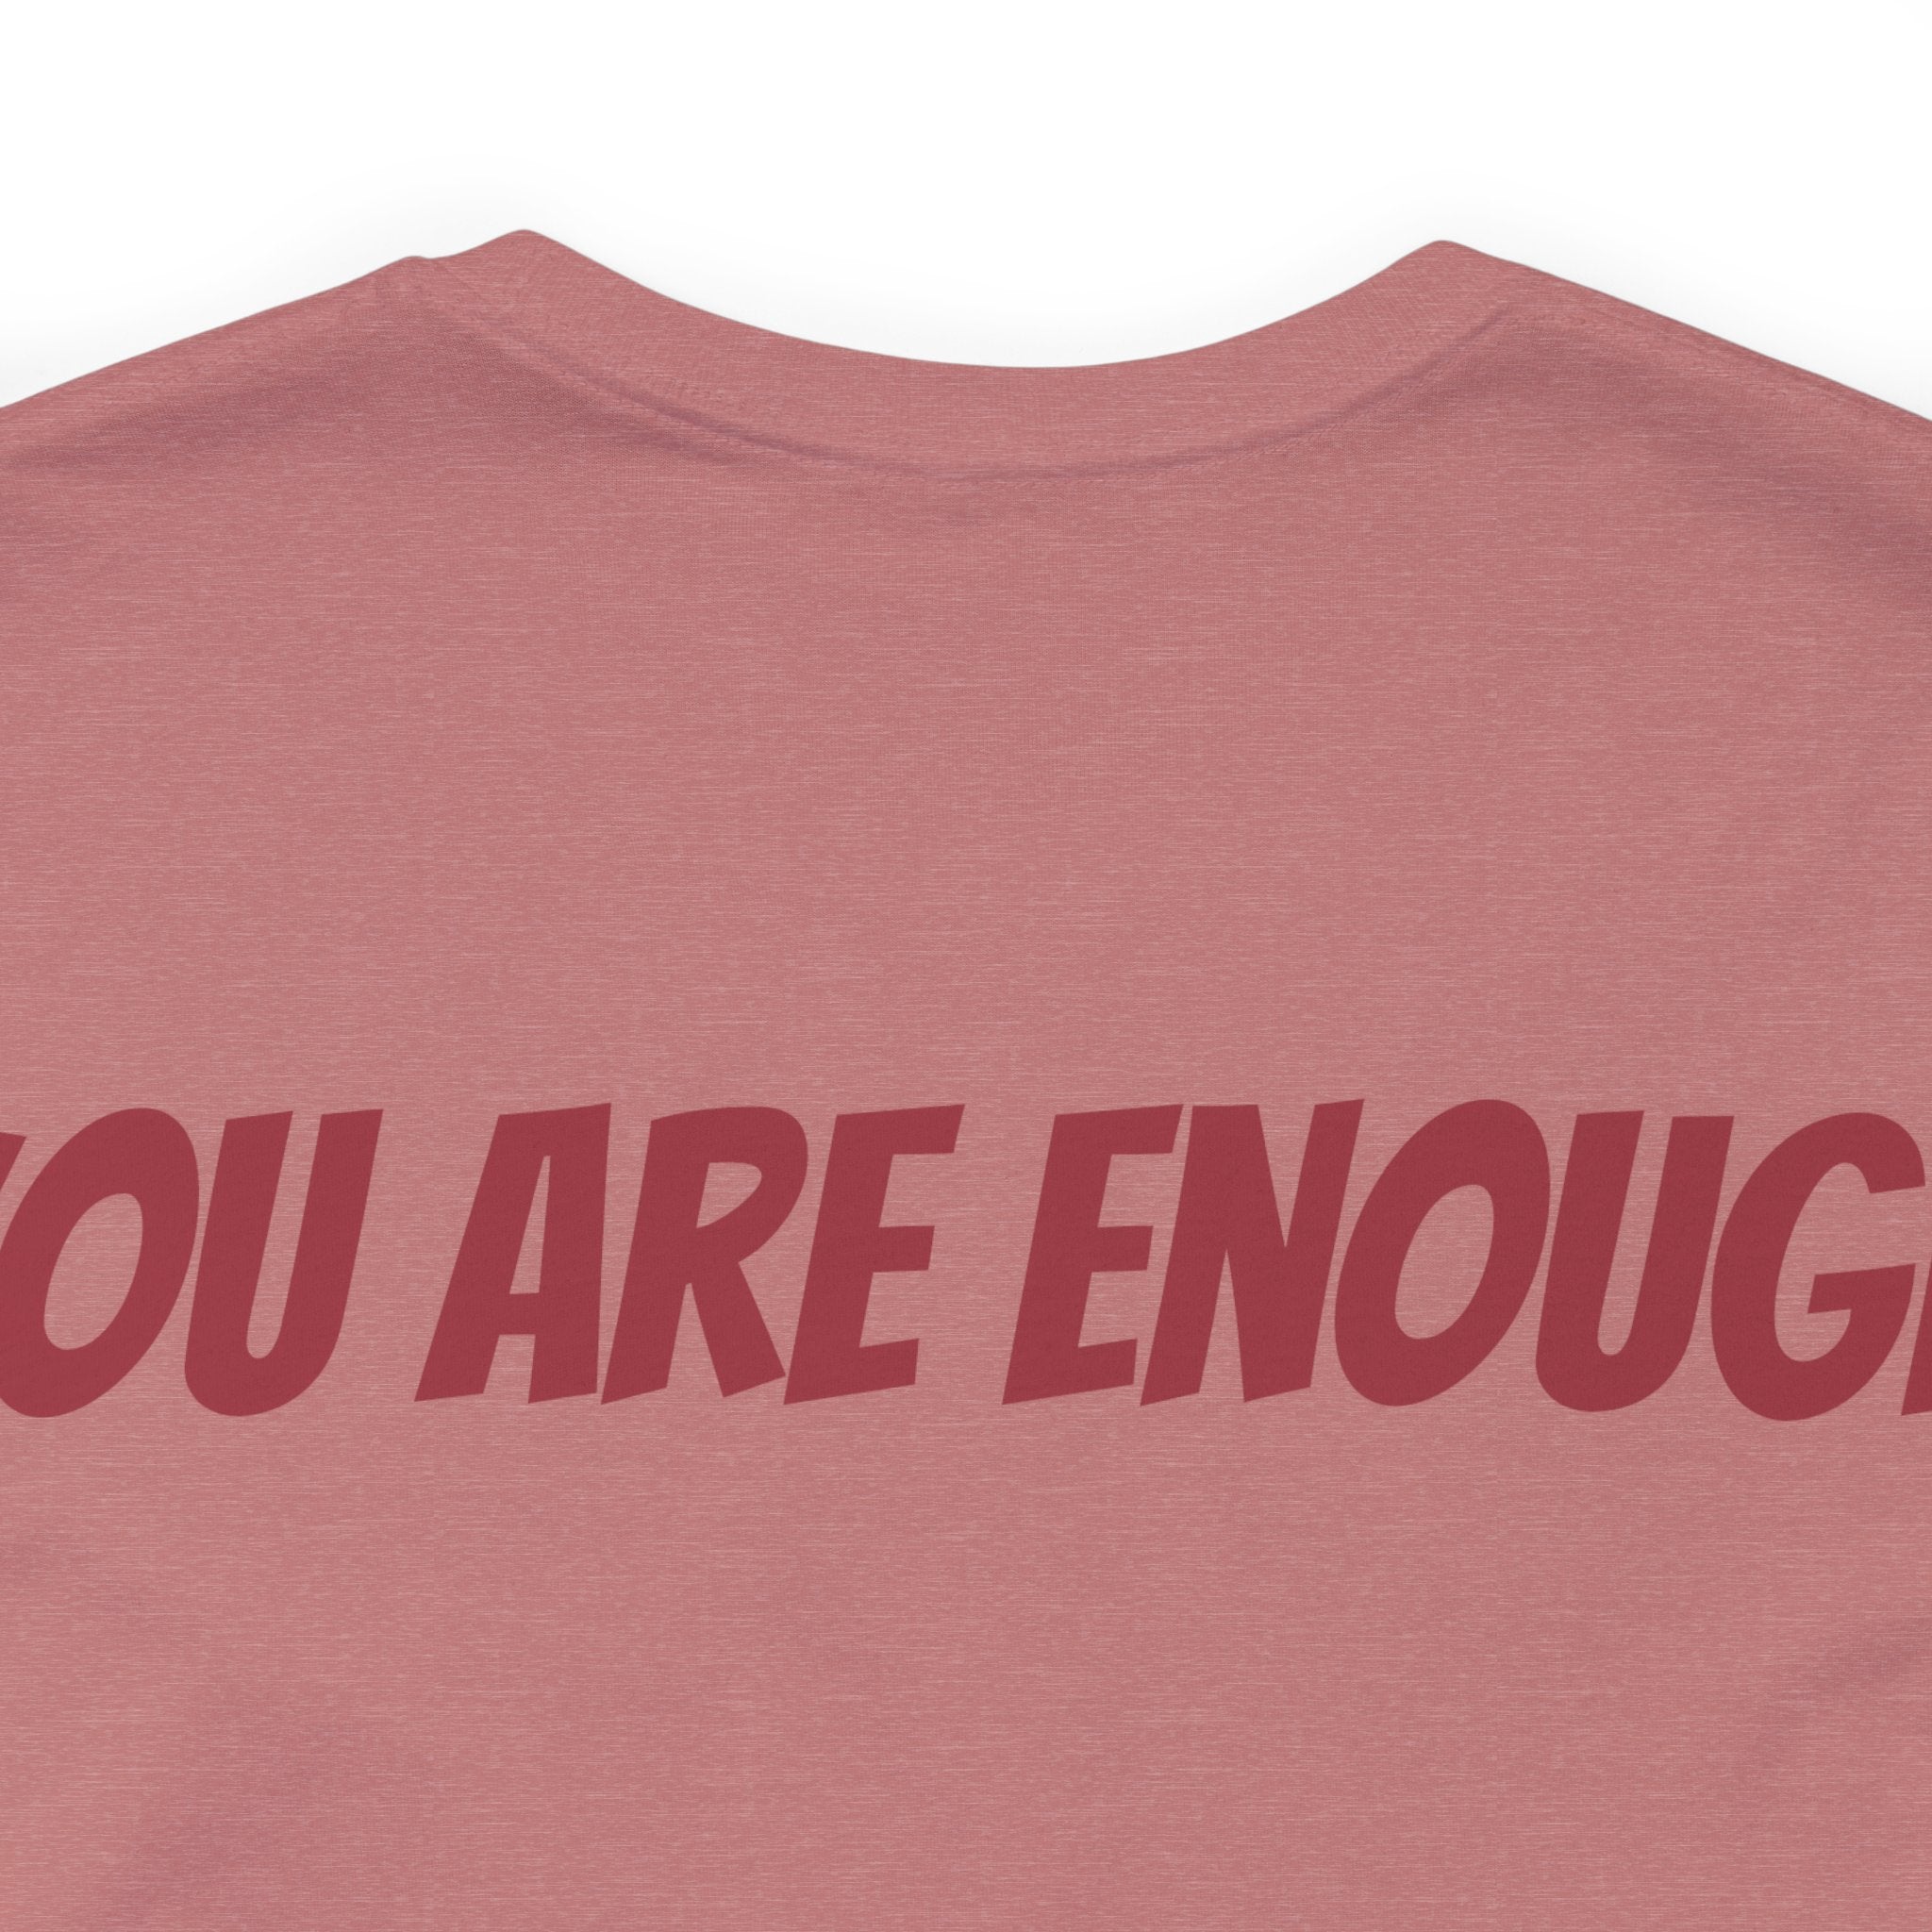 You Are Enough Short Sleeve Tee Bella+Canvas 3001 Heather Mauve Airlume Cotton Bella+Canvas 3001 Crew Neckline Jersey Short Sleeve Lightweight Fabric Mental Health Support Retail Fit Tear-away Label Tee Unisex Tee T-Shirt 16978354068101570760_2048 Printify